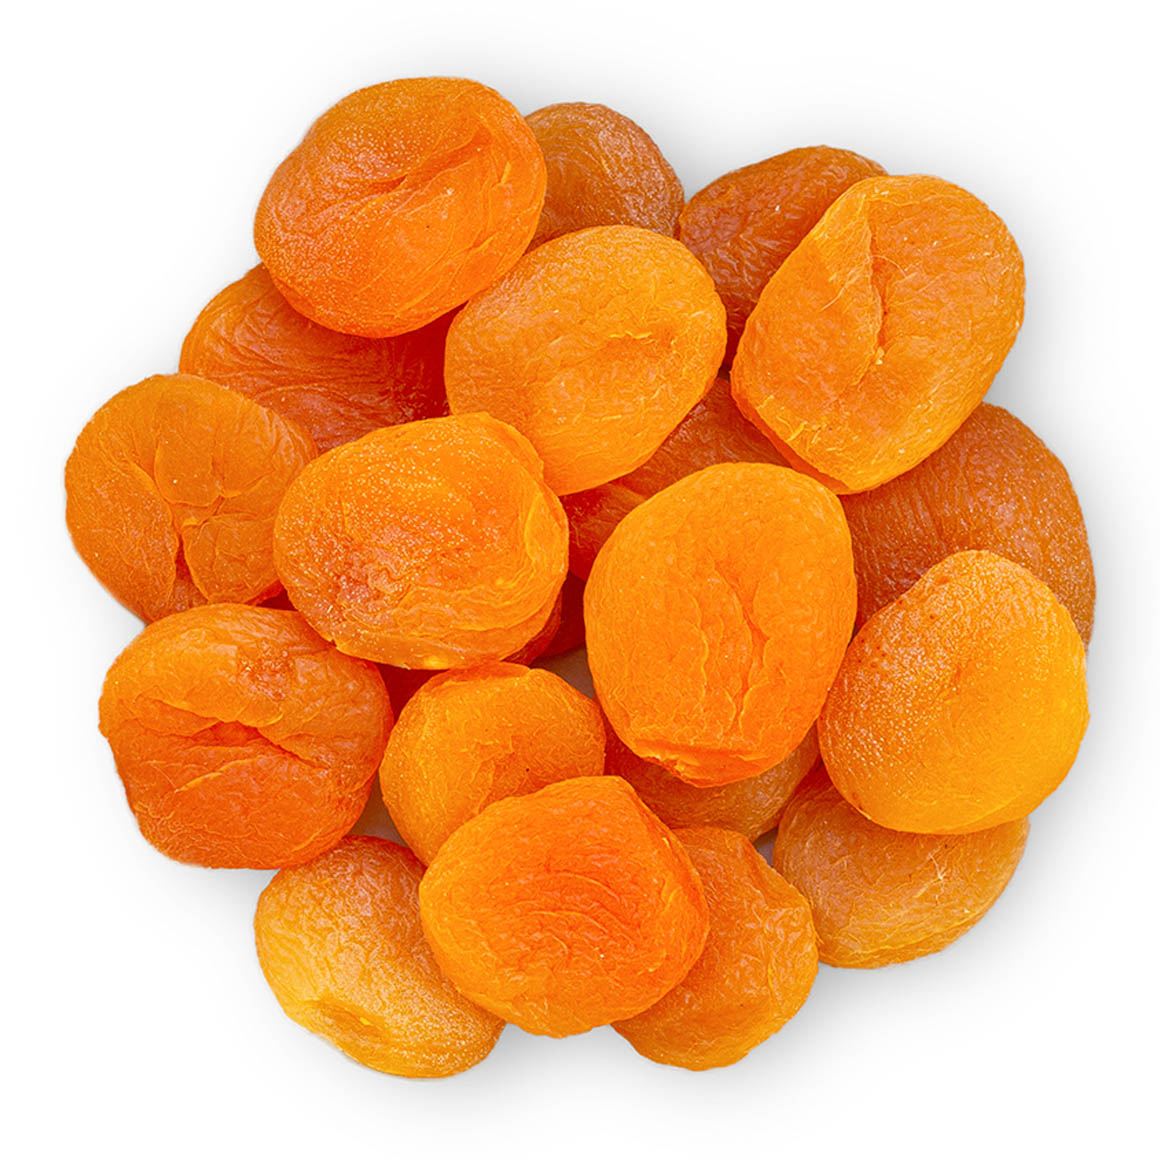 dried-apricots-main